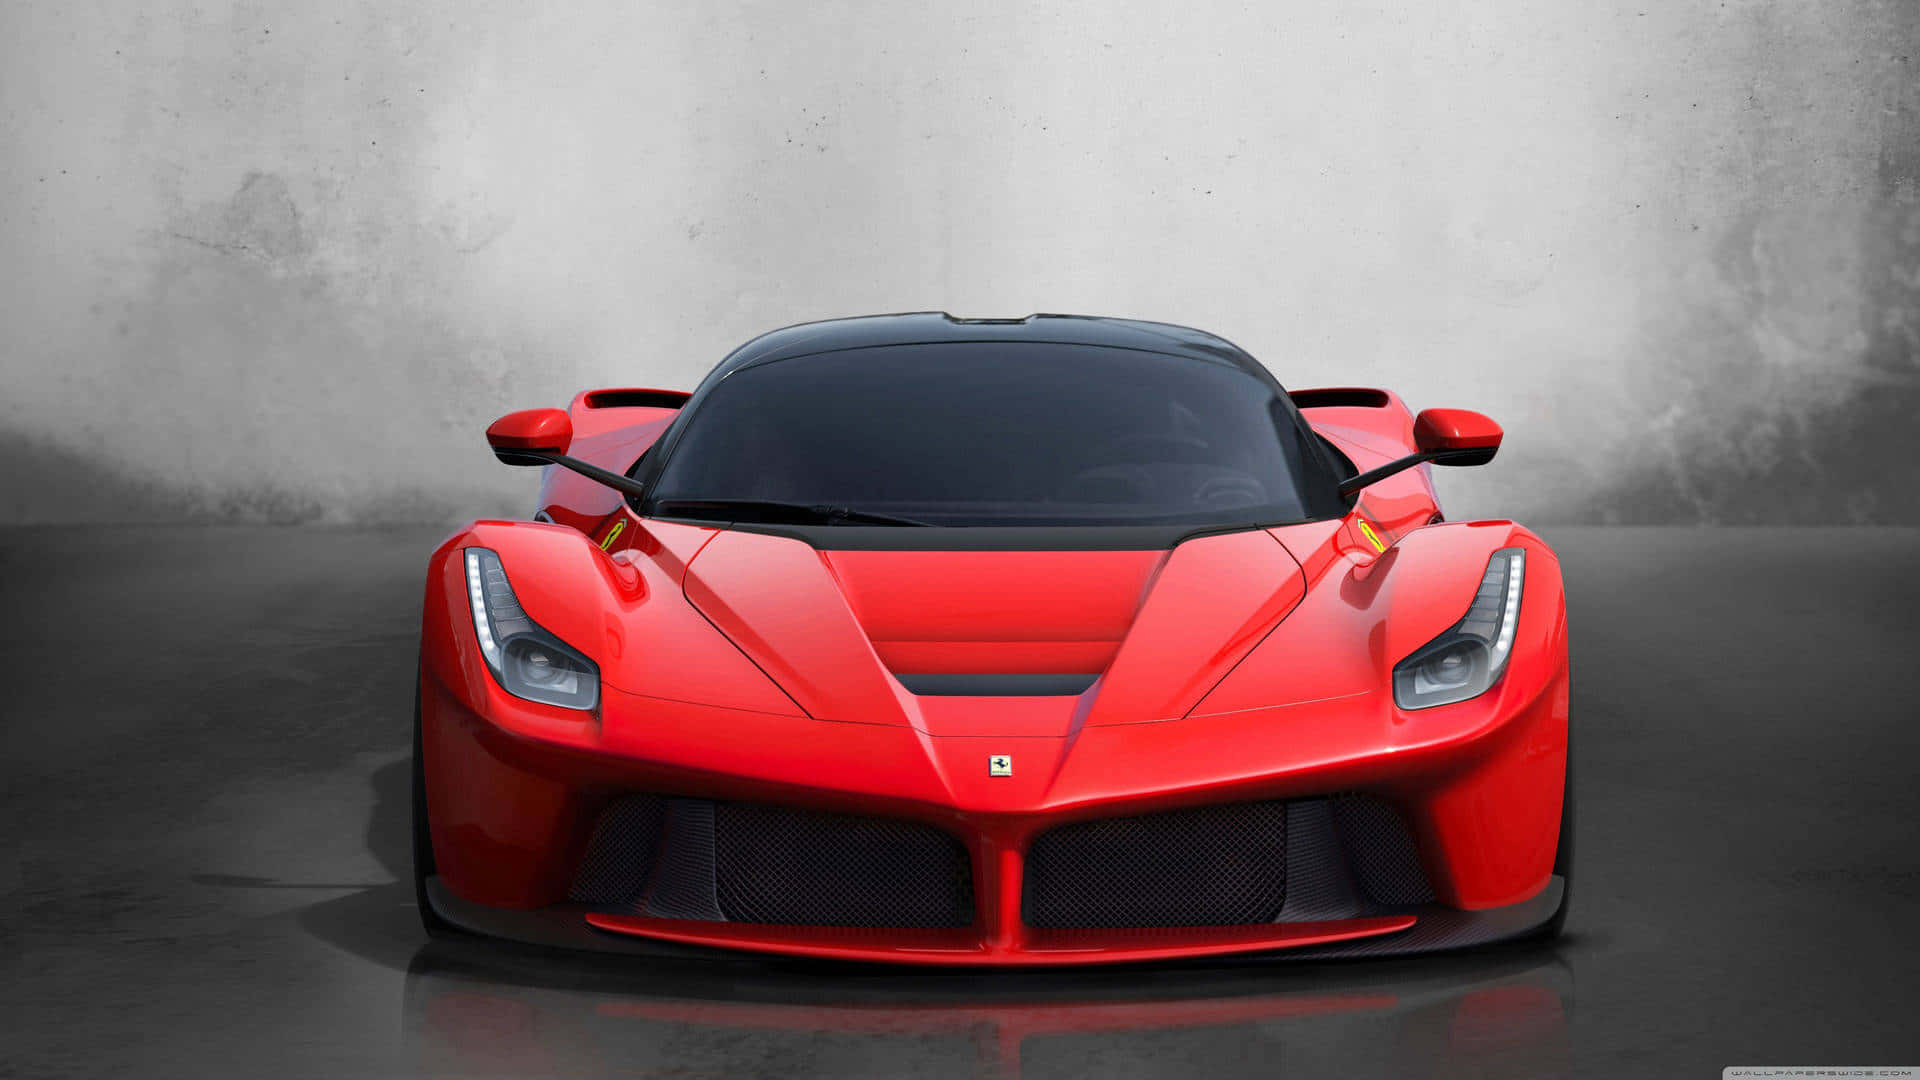 Get Ready to Race with These Cool Ferrari Cars! Wallpaper